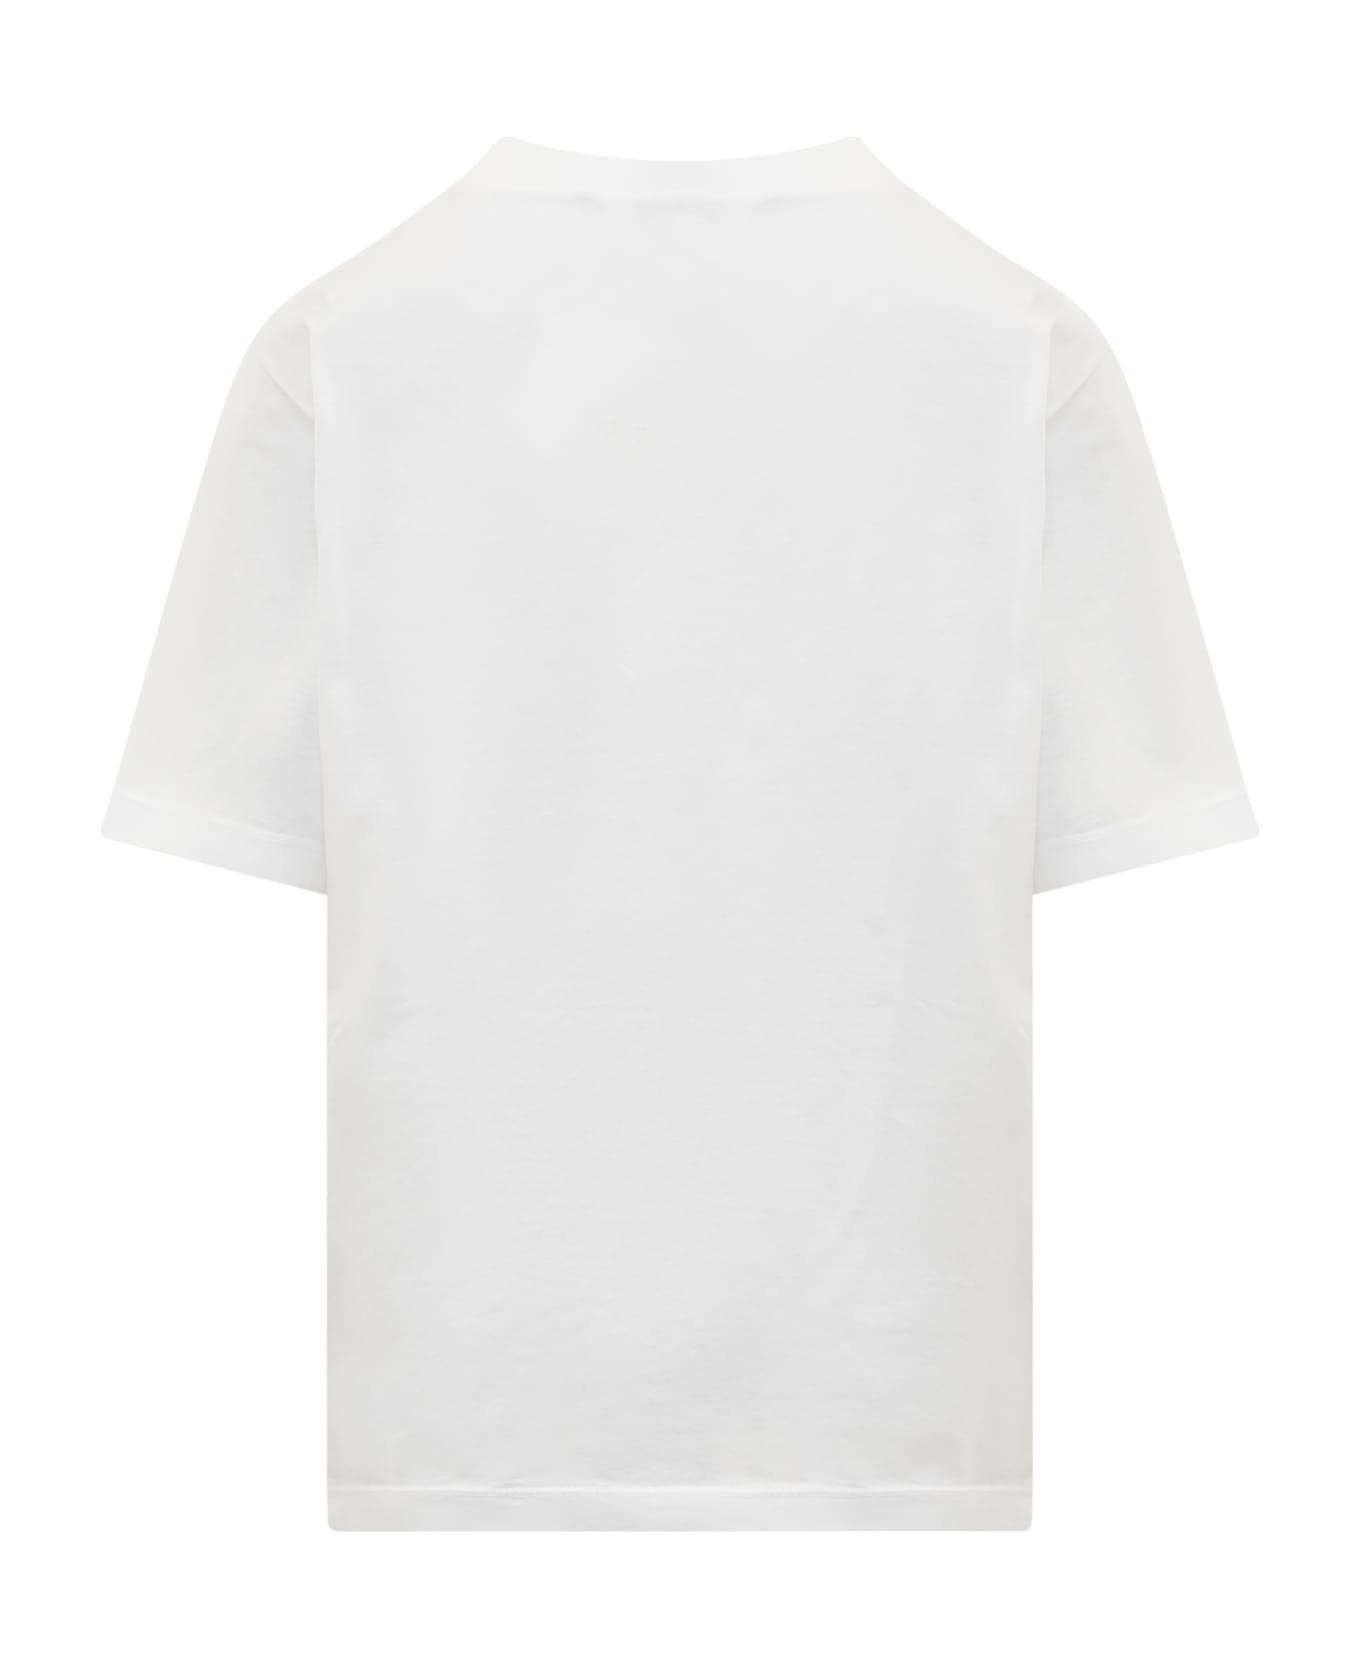 Dsquared2 Short Sleeve Printed Cotton T-shirt - White